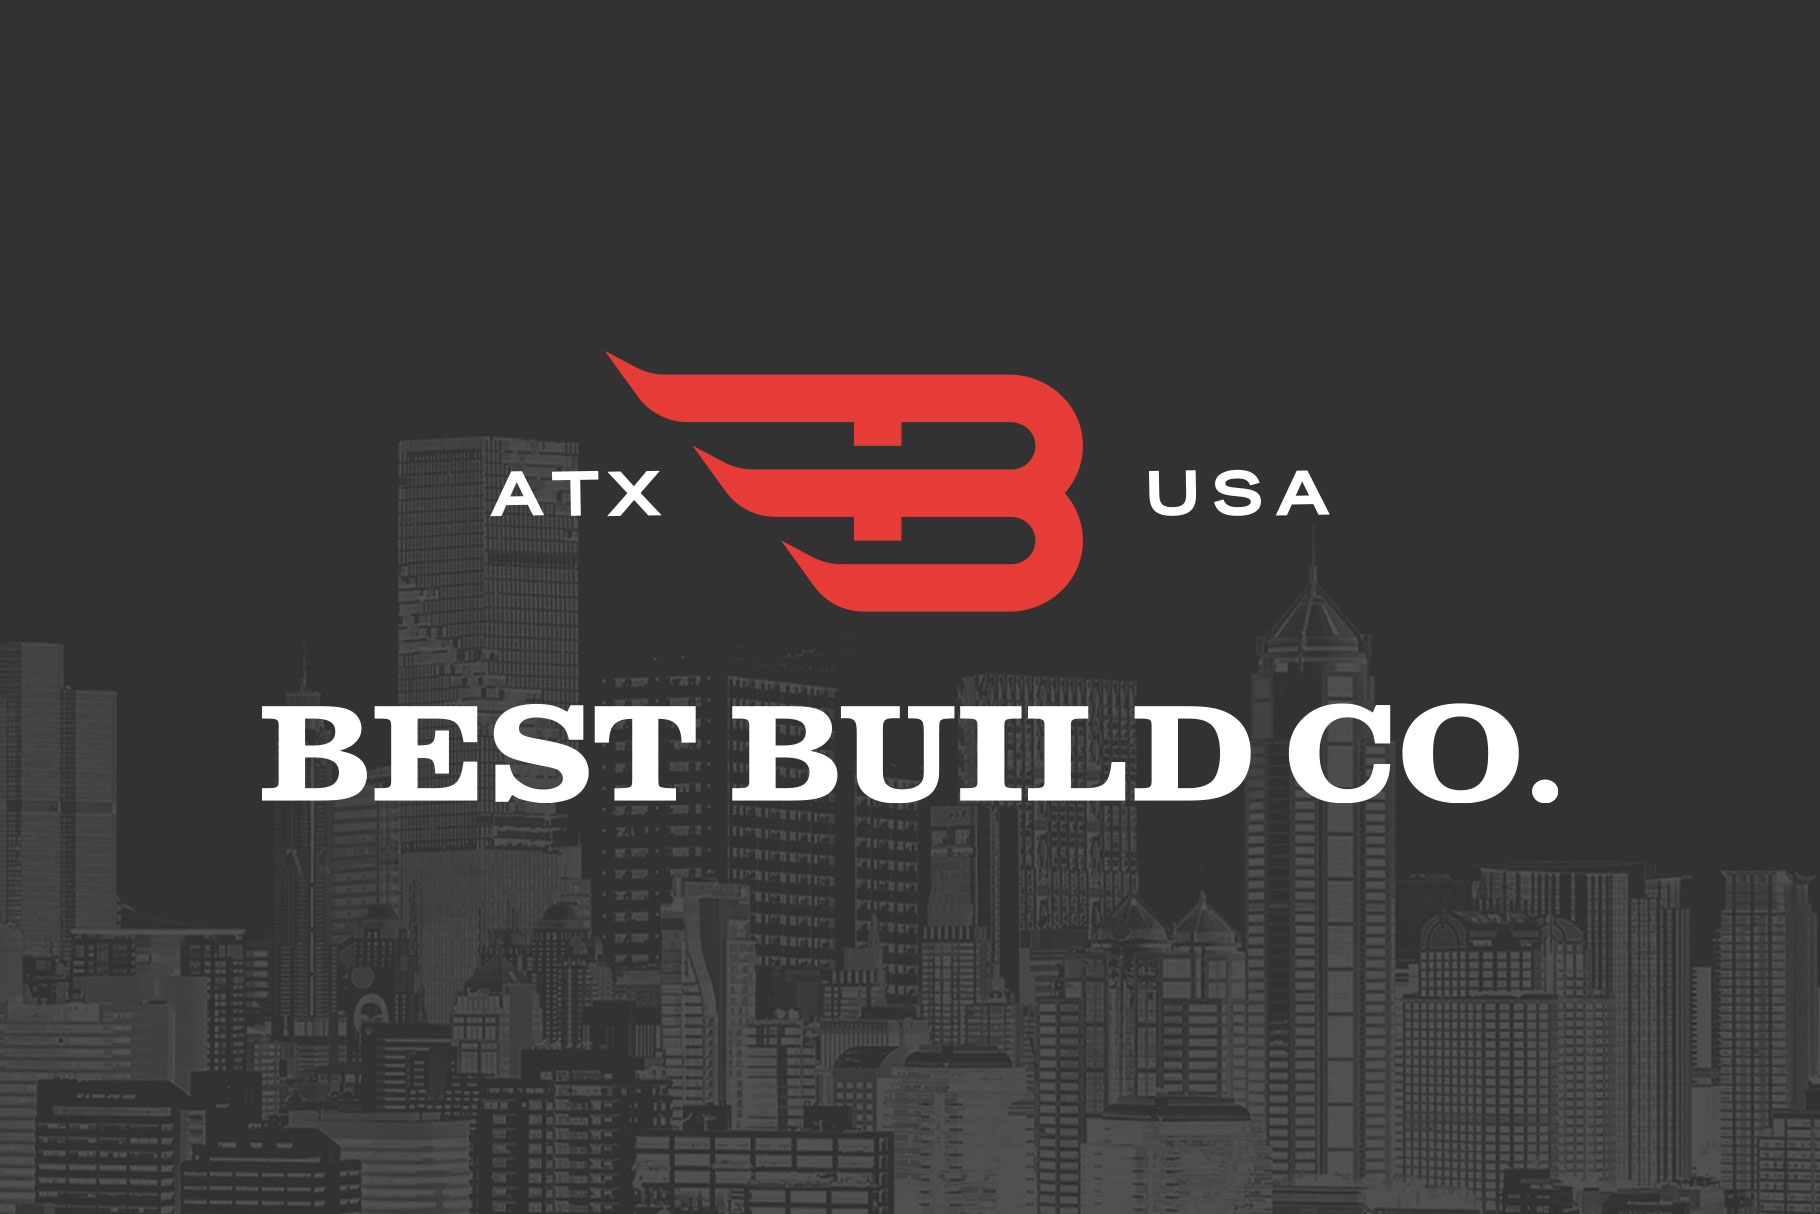 Best Build Co. logo stacked over city scape